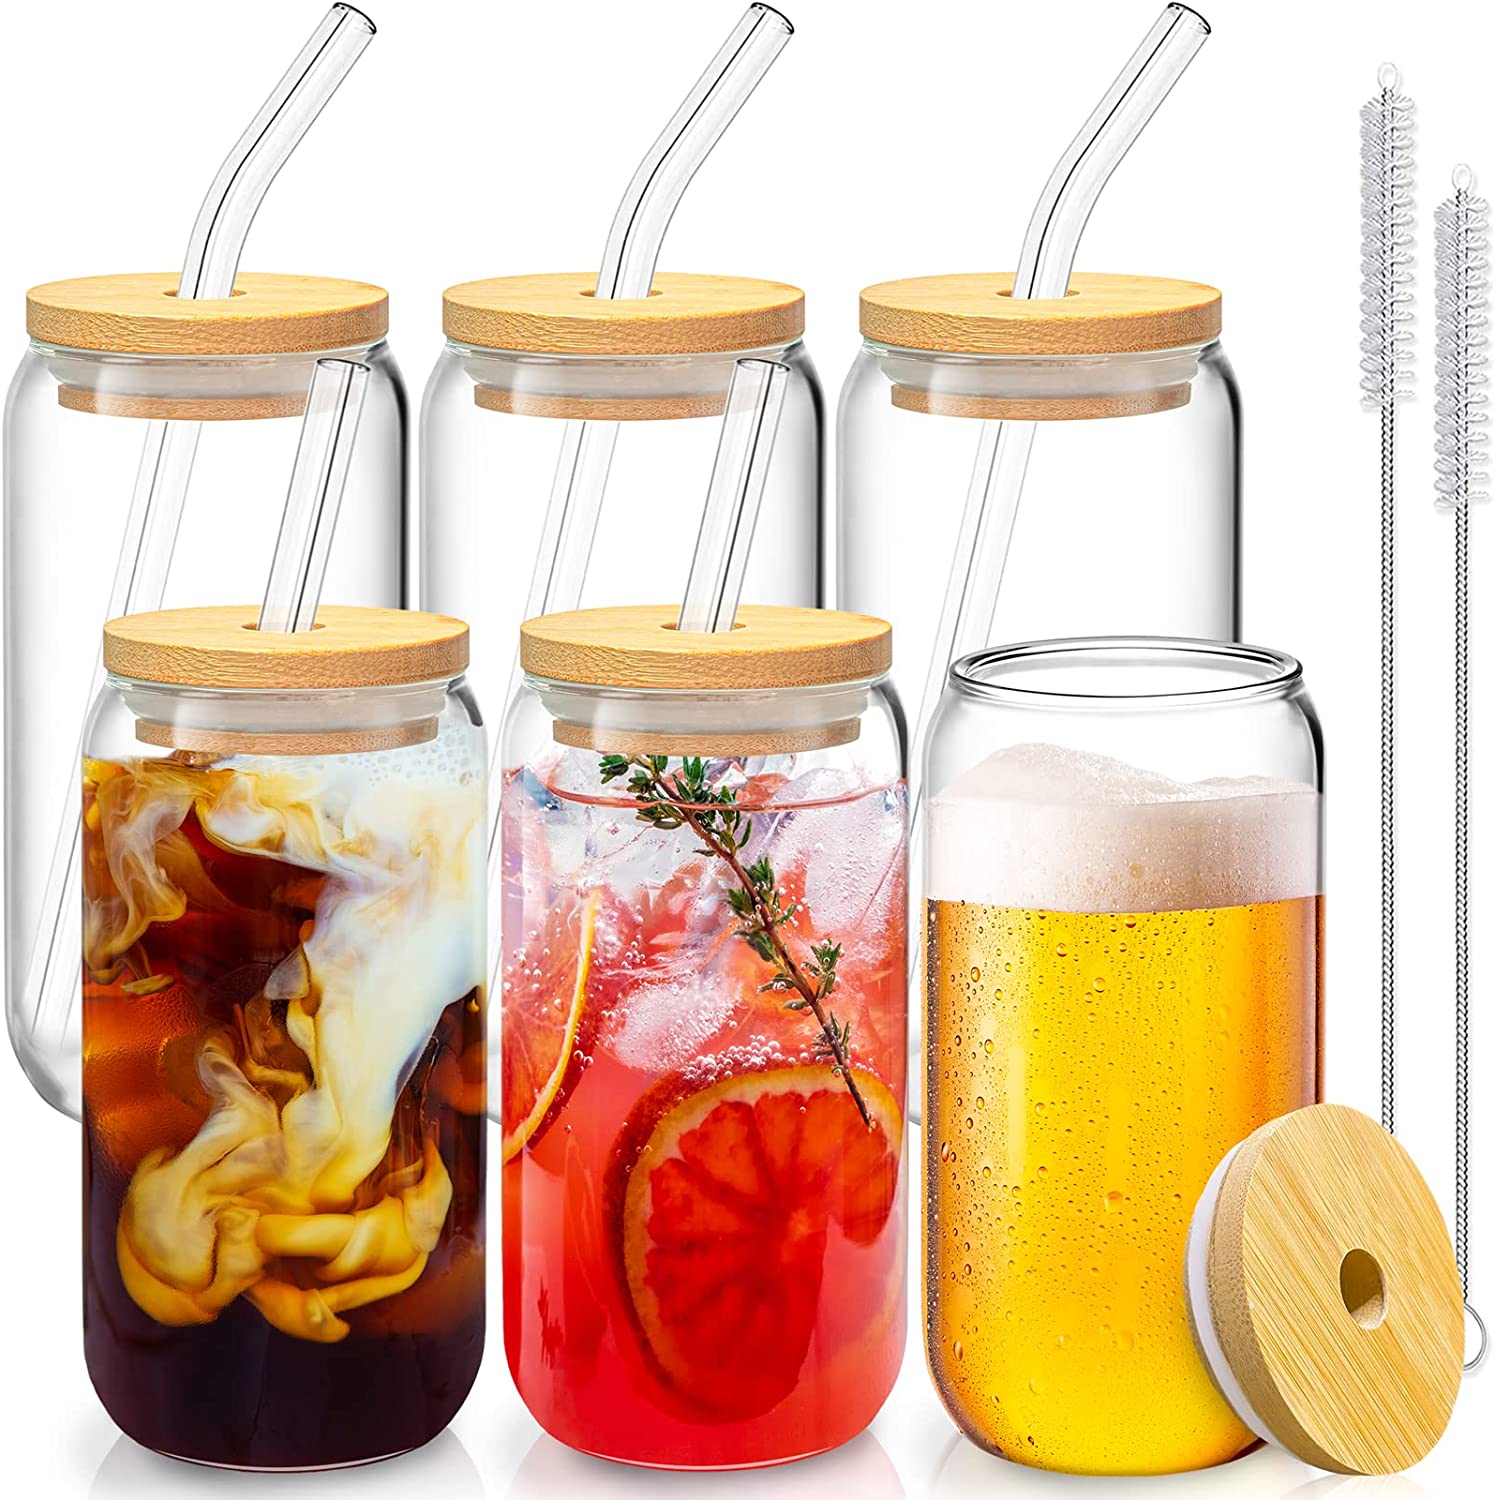 Glass Cups With Lids,Bamboo Lid With Straw,Beer Glasses With Lid And  Straw,Reusable Drinking Glasses